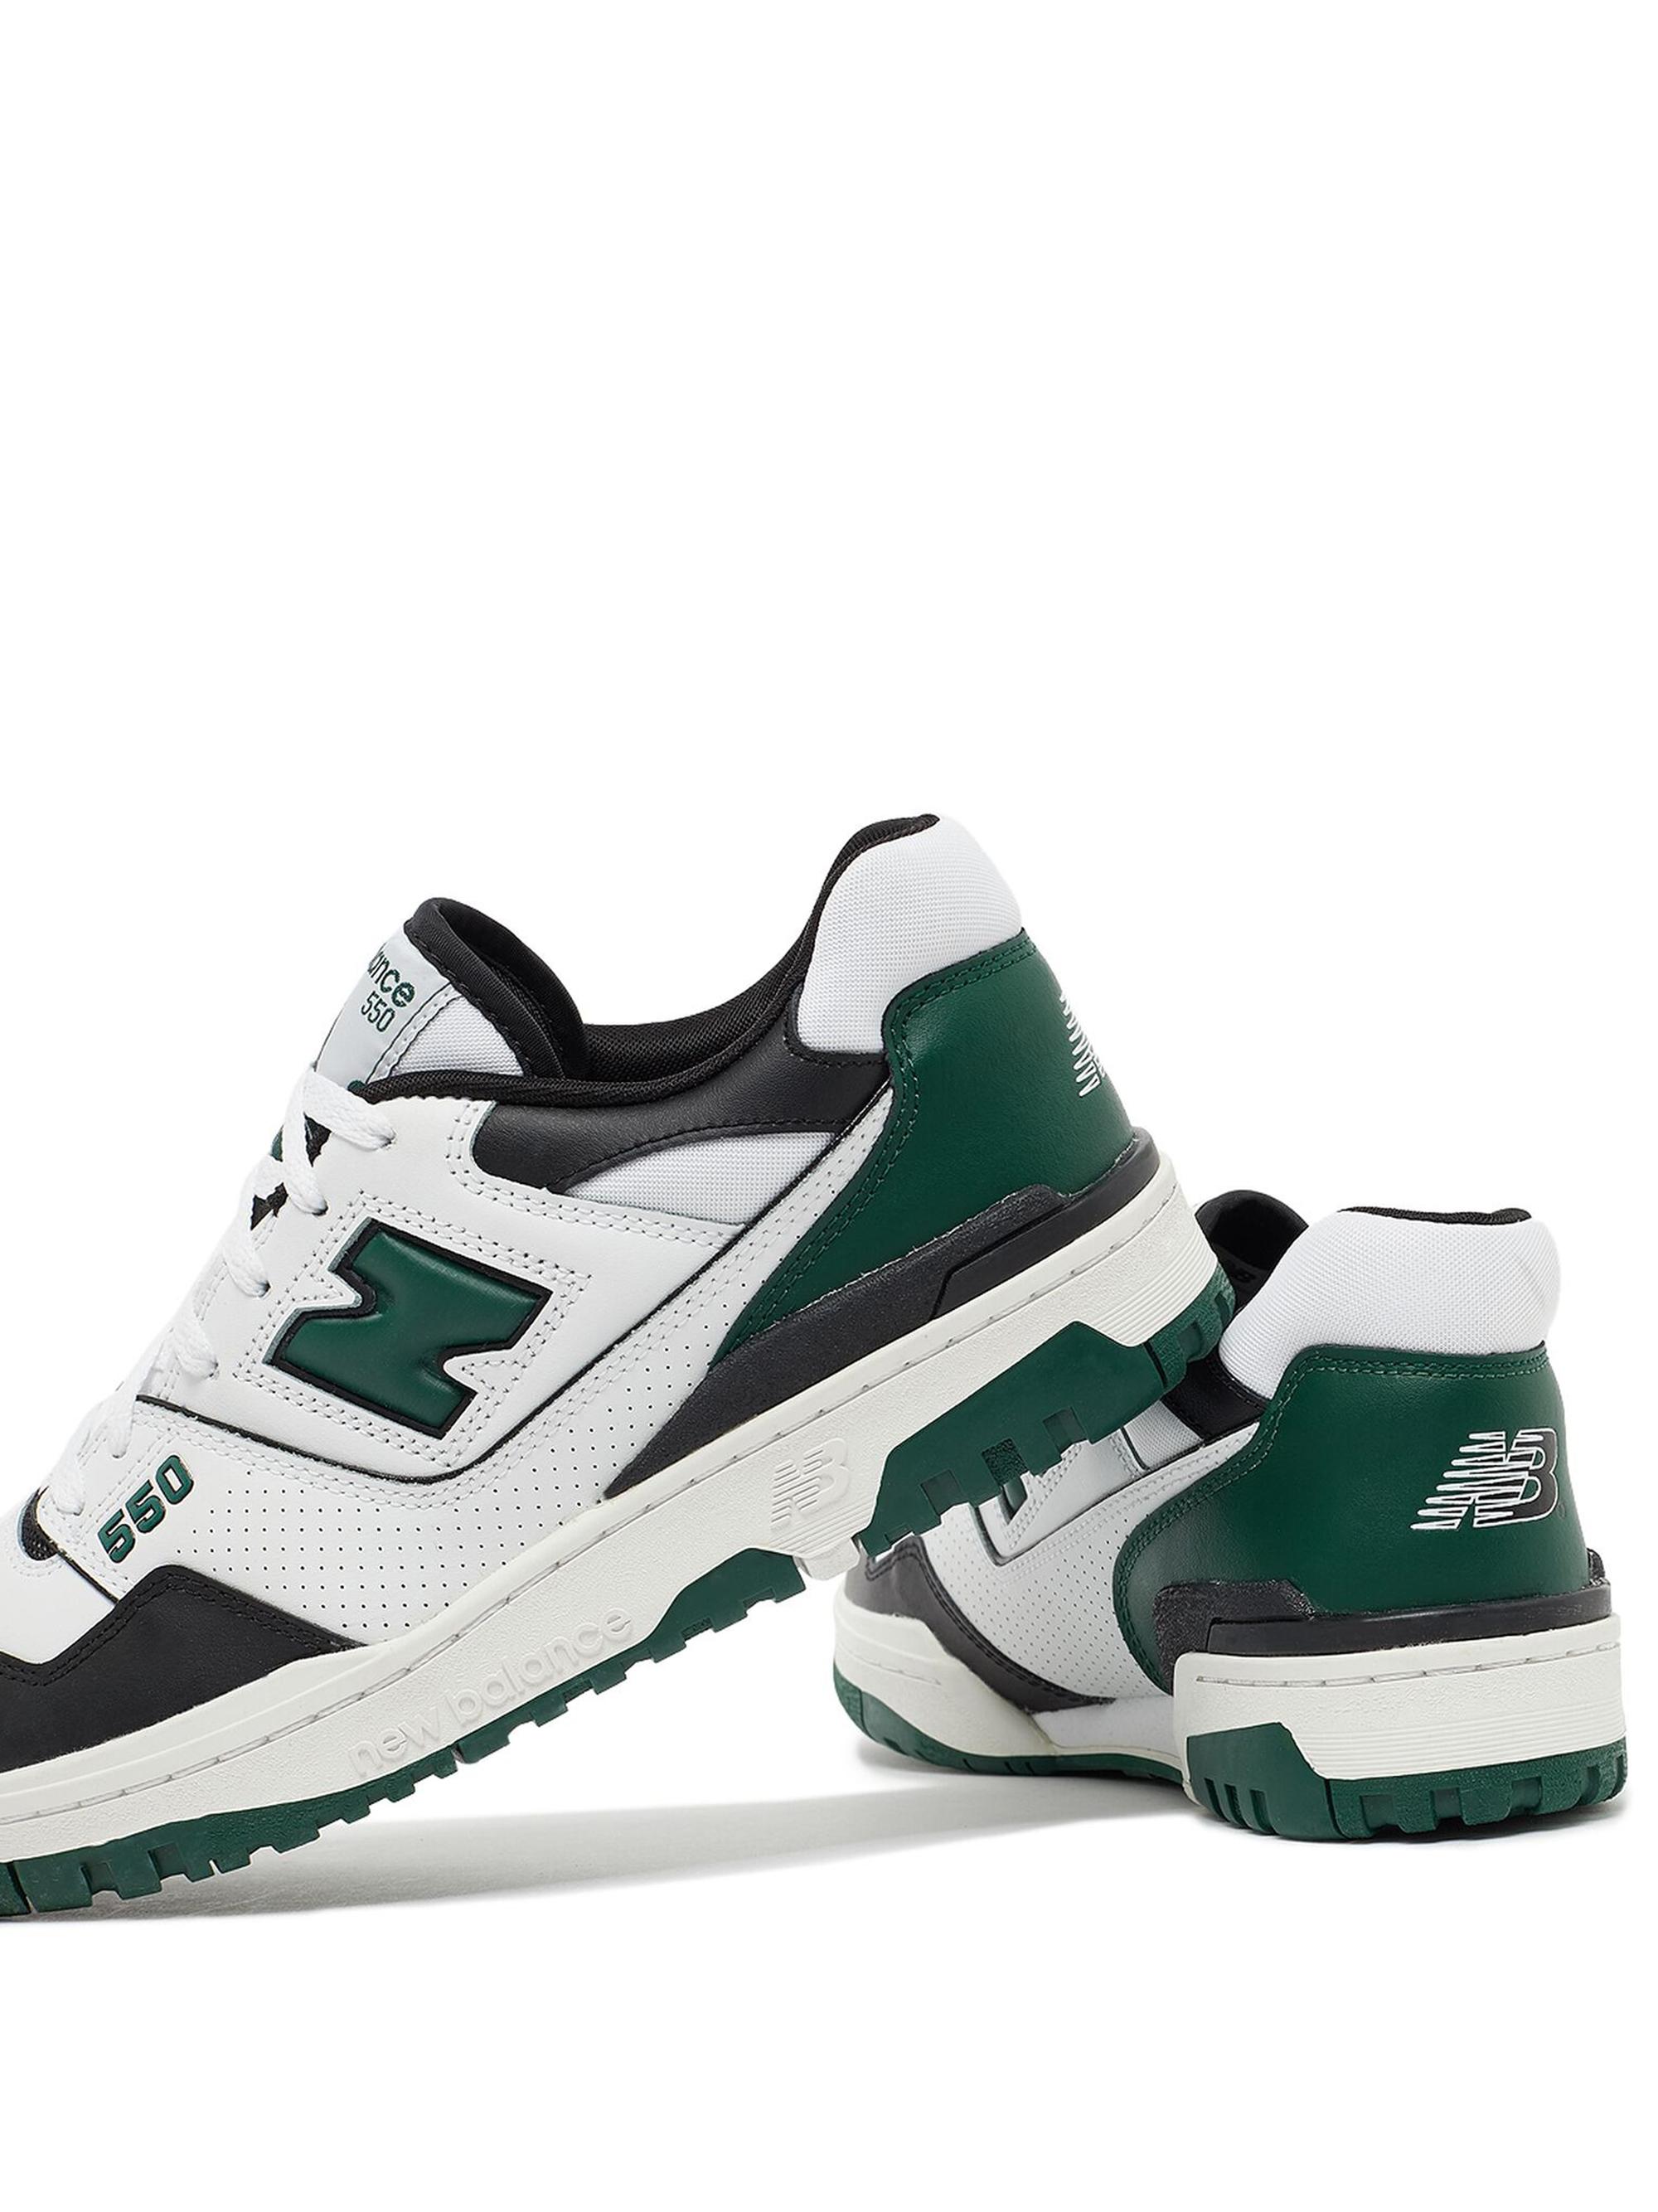 New Balance 550 Sneakers Green In Leather | Lyst